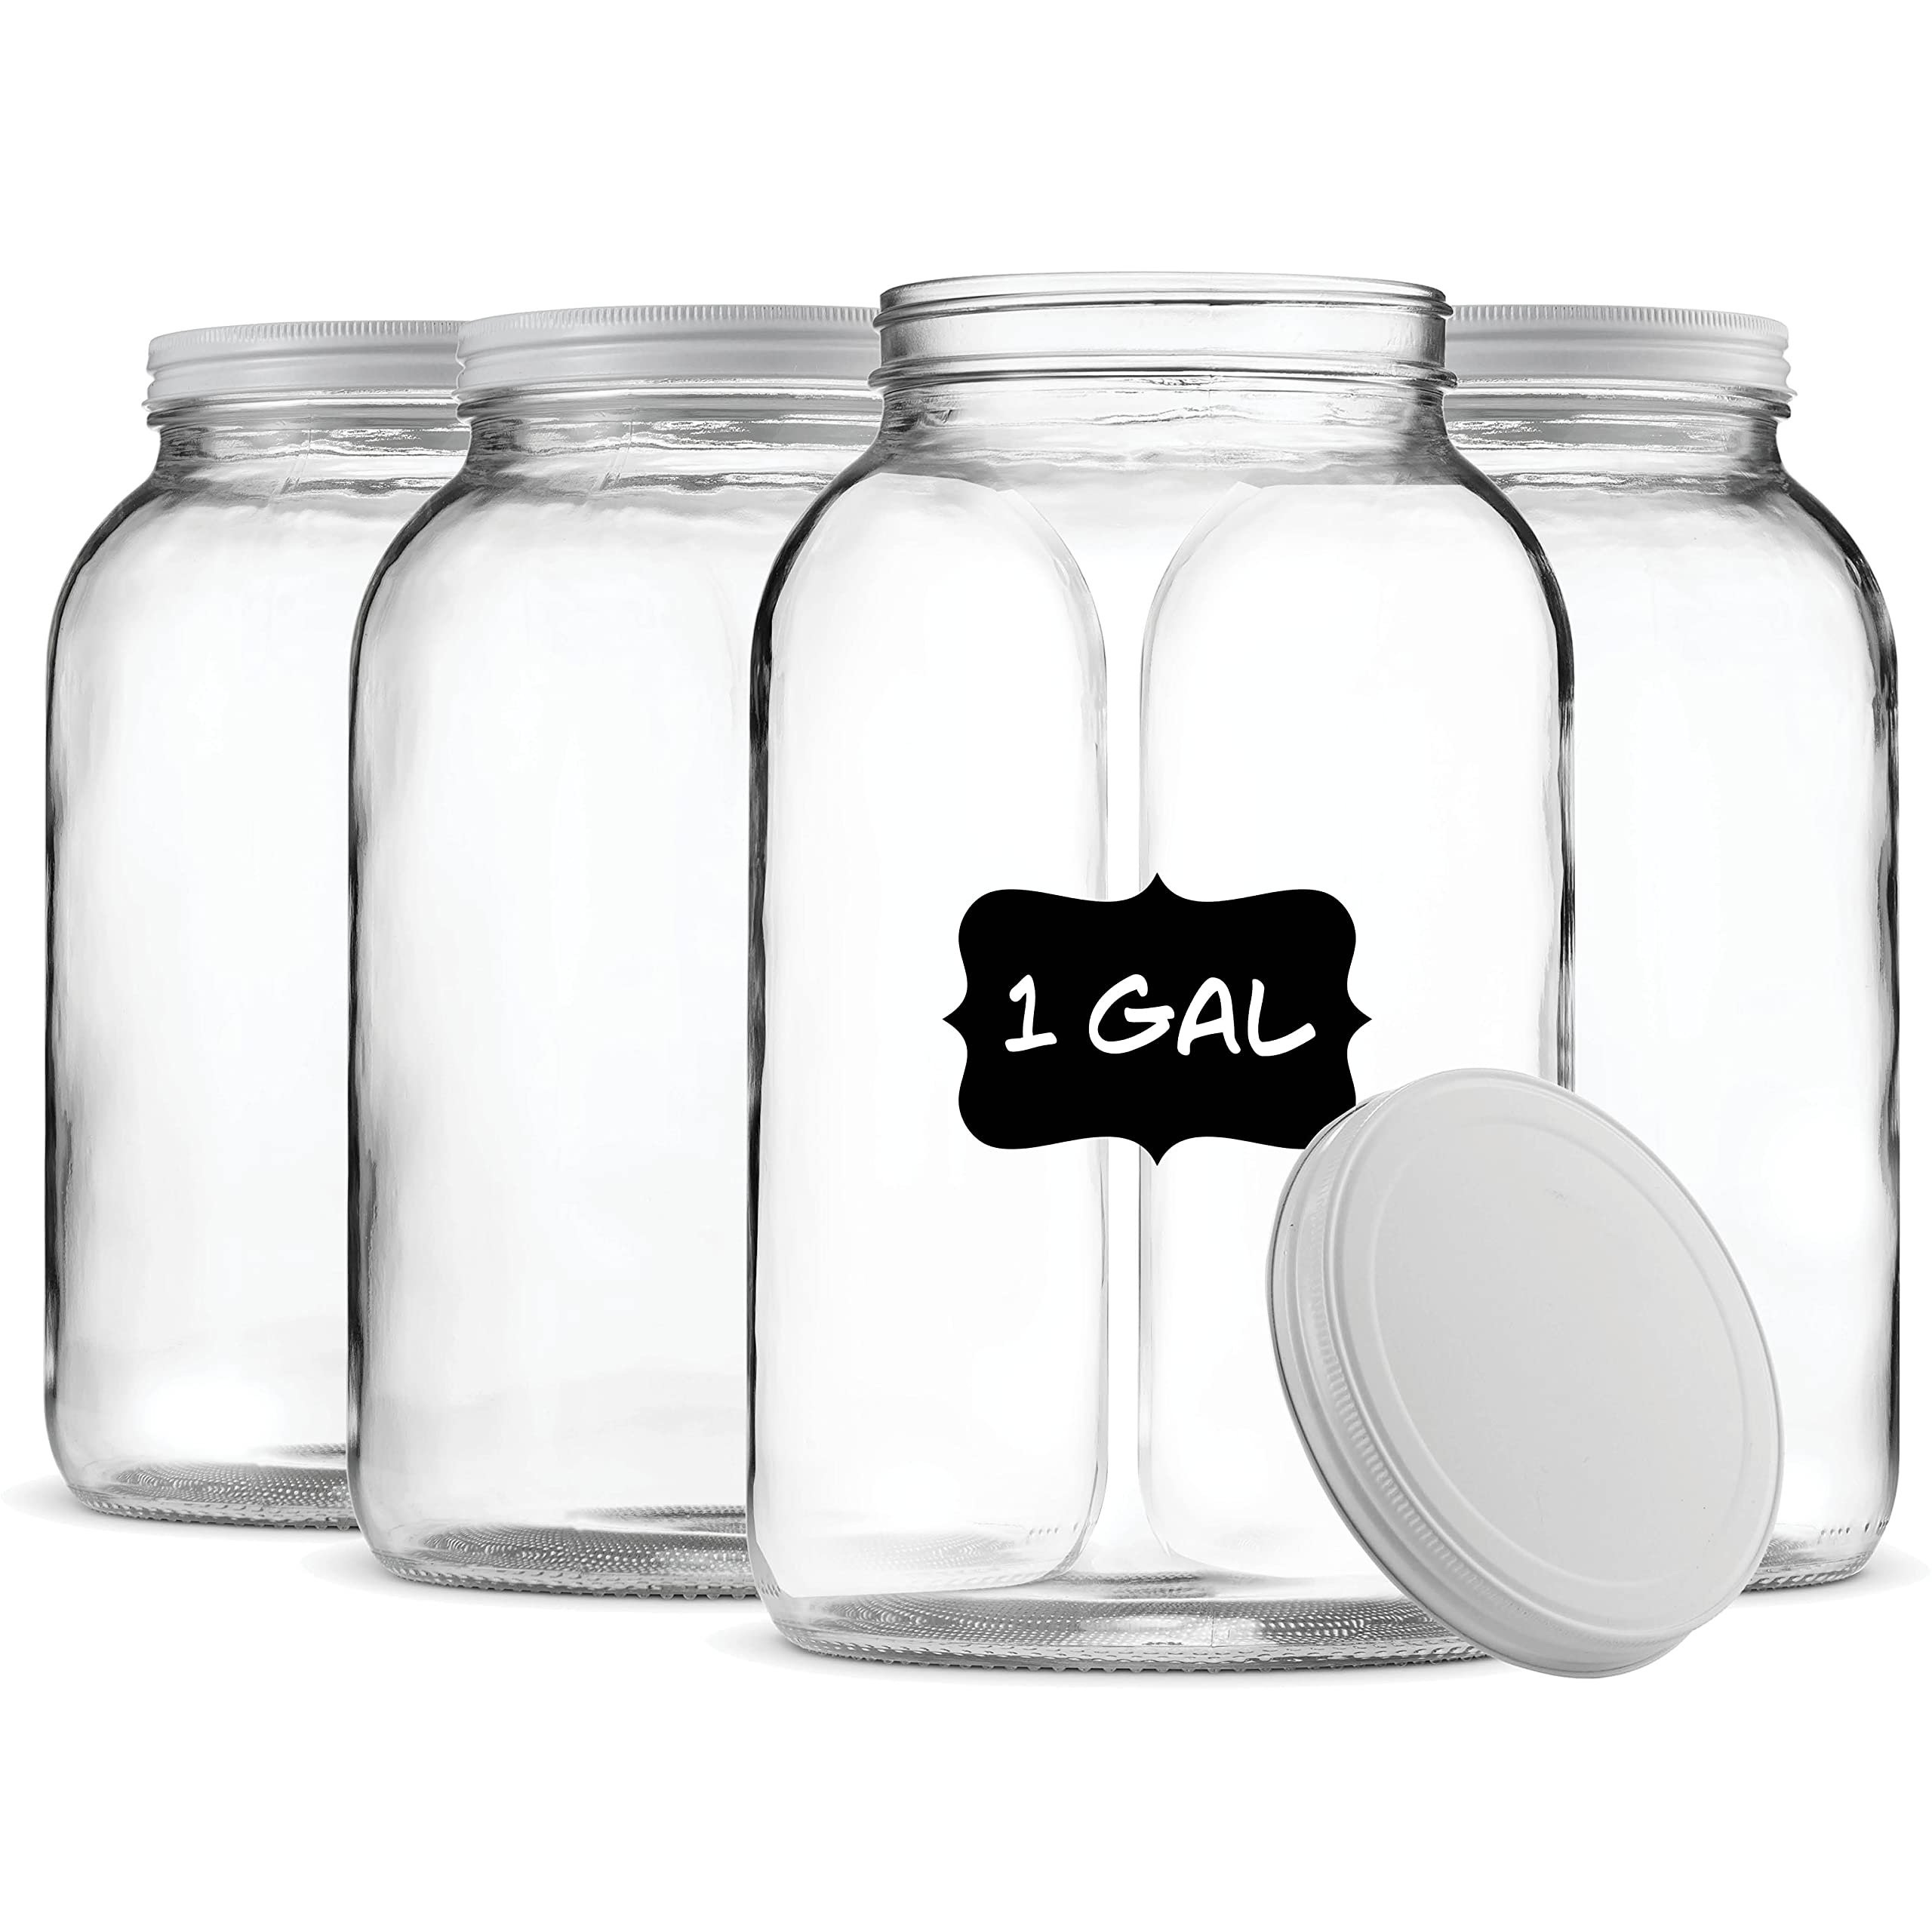 Paksh Novelty - Food Storage Container - Glass Jar Wide Mouth, Airtight Metal Lid, USDA Approved BPA-Free Dishwasher Safe for Fermenting Kombucha